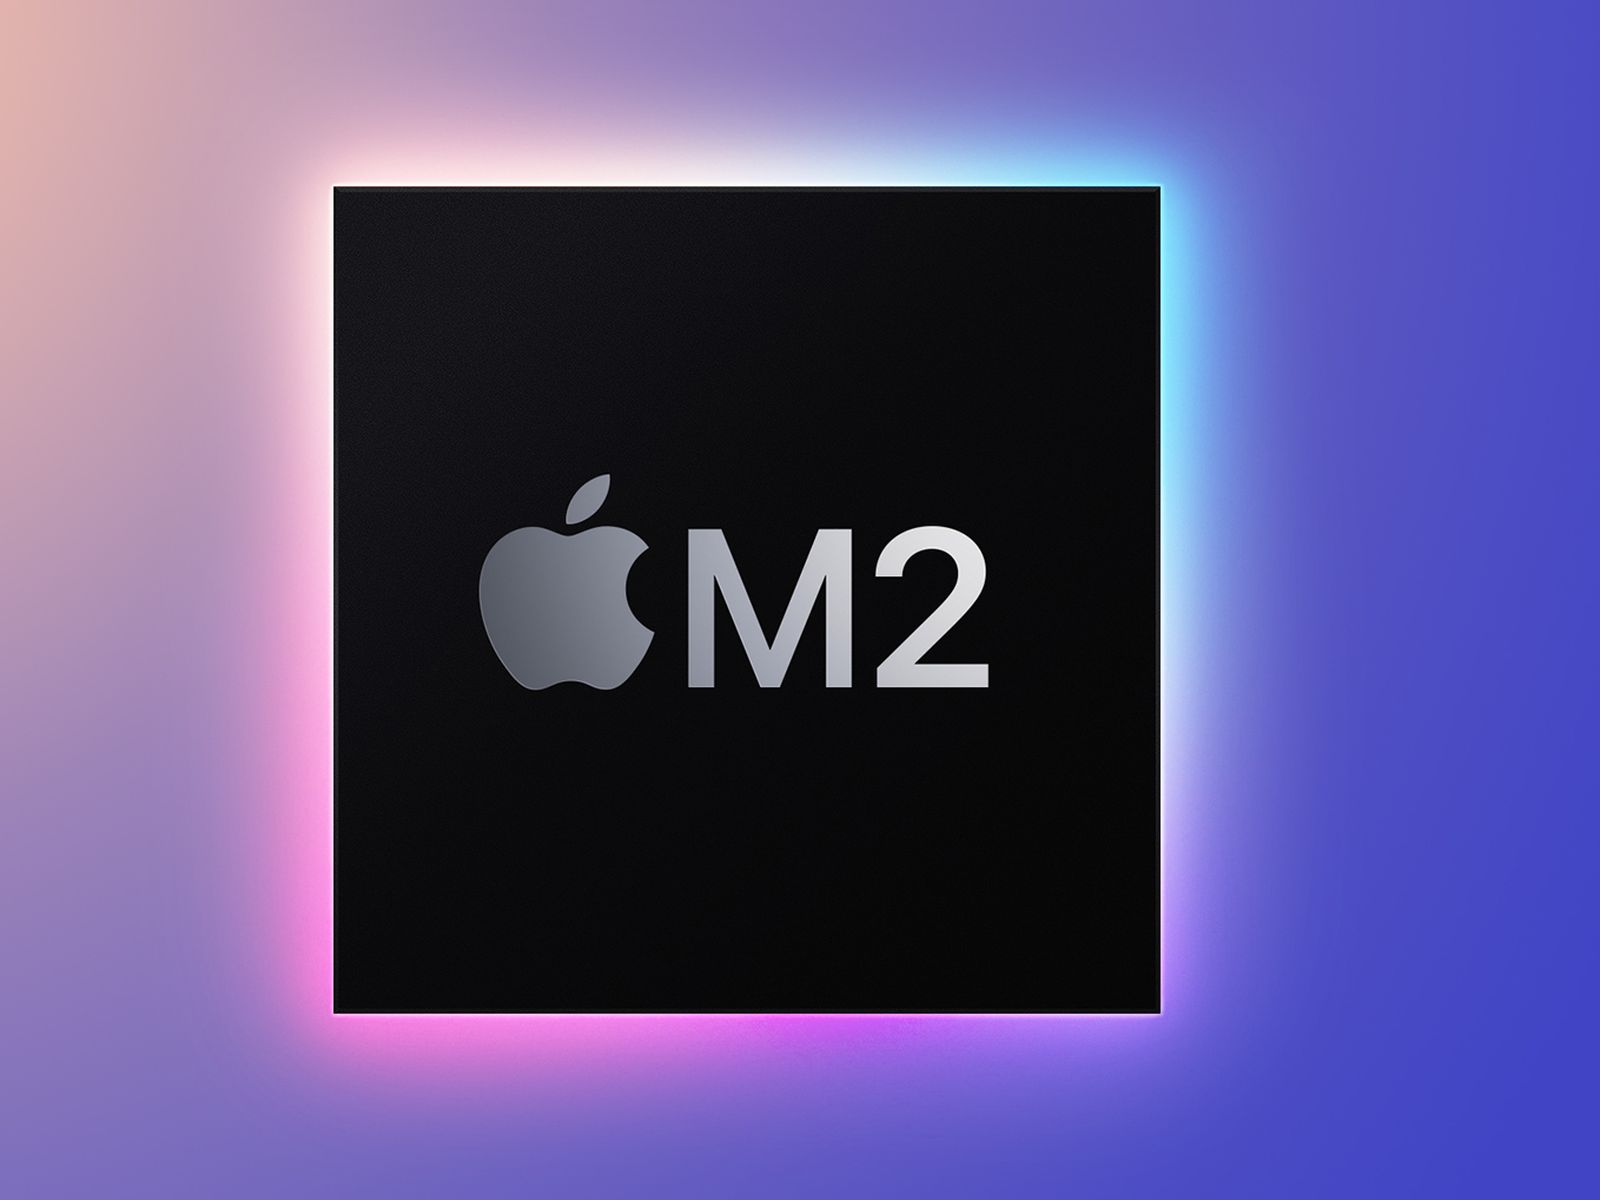 Apple is secretly testing Macs with M2 chips